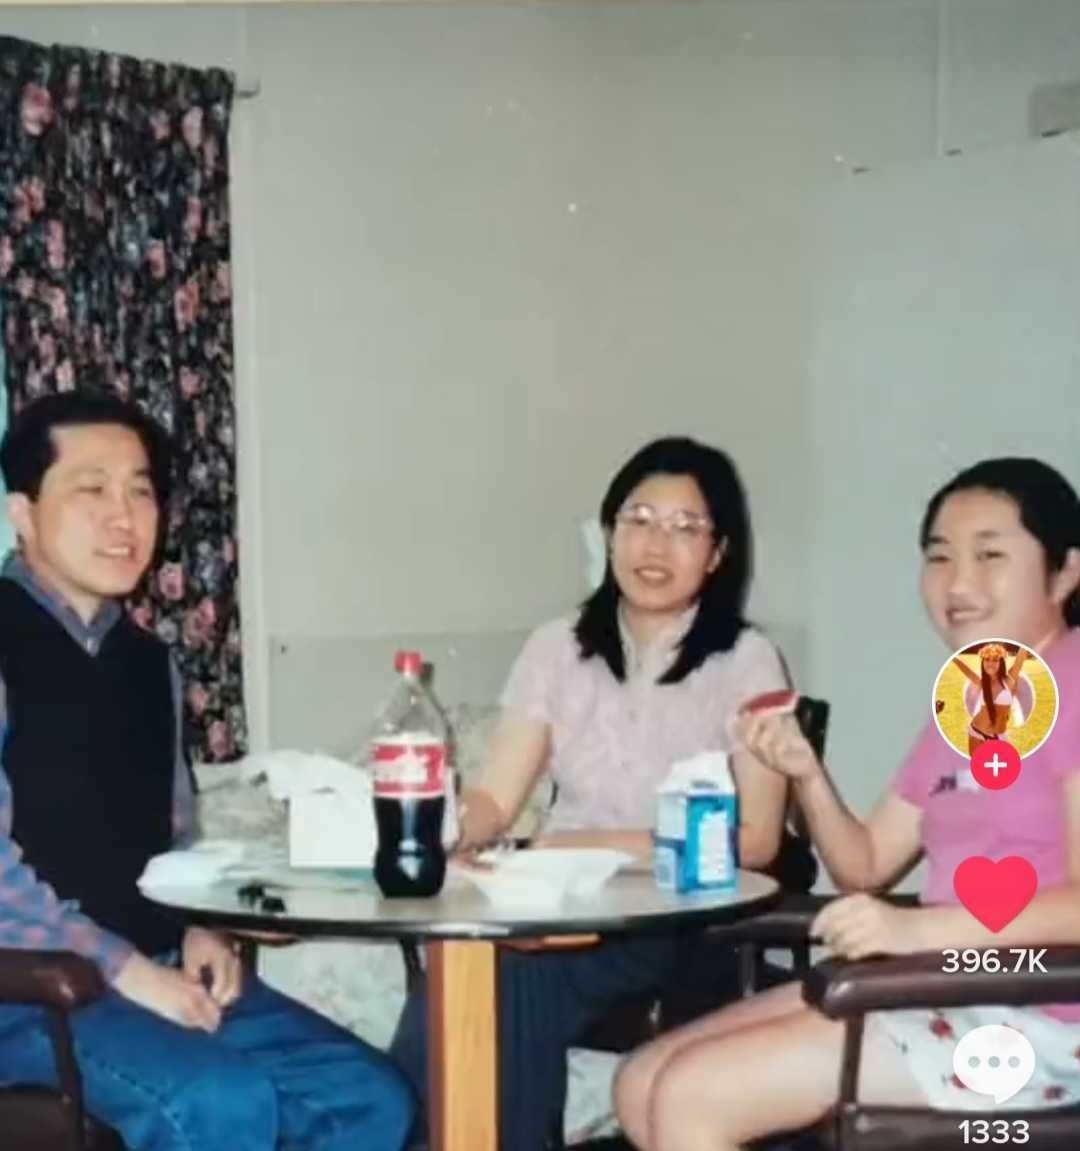 Screencaps of Jane Lu&#x27;s TikTok showing Jane at a small table with her parents